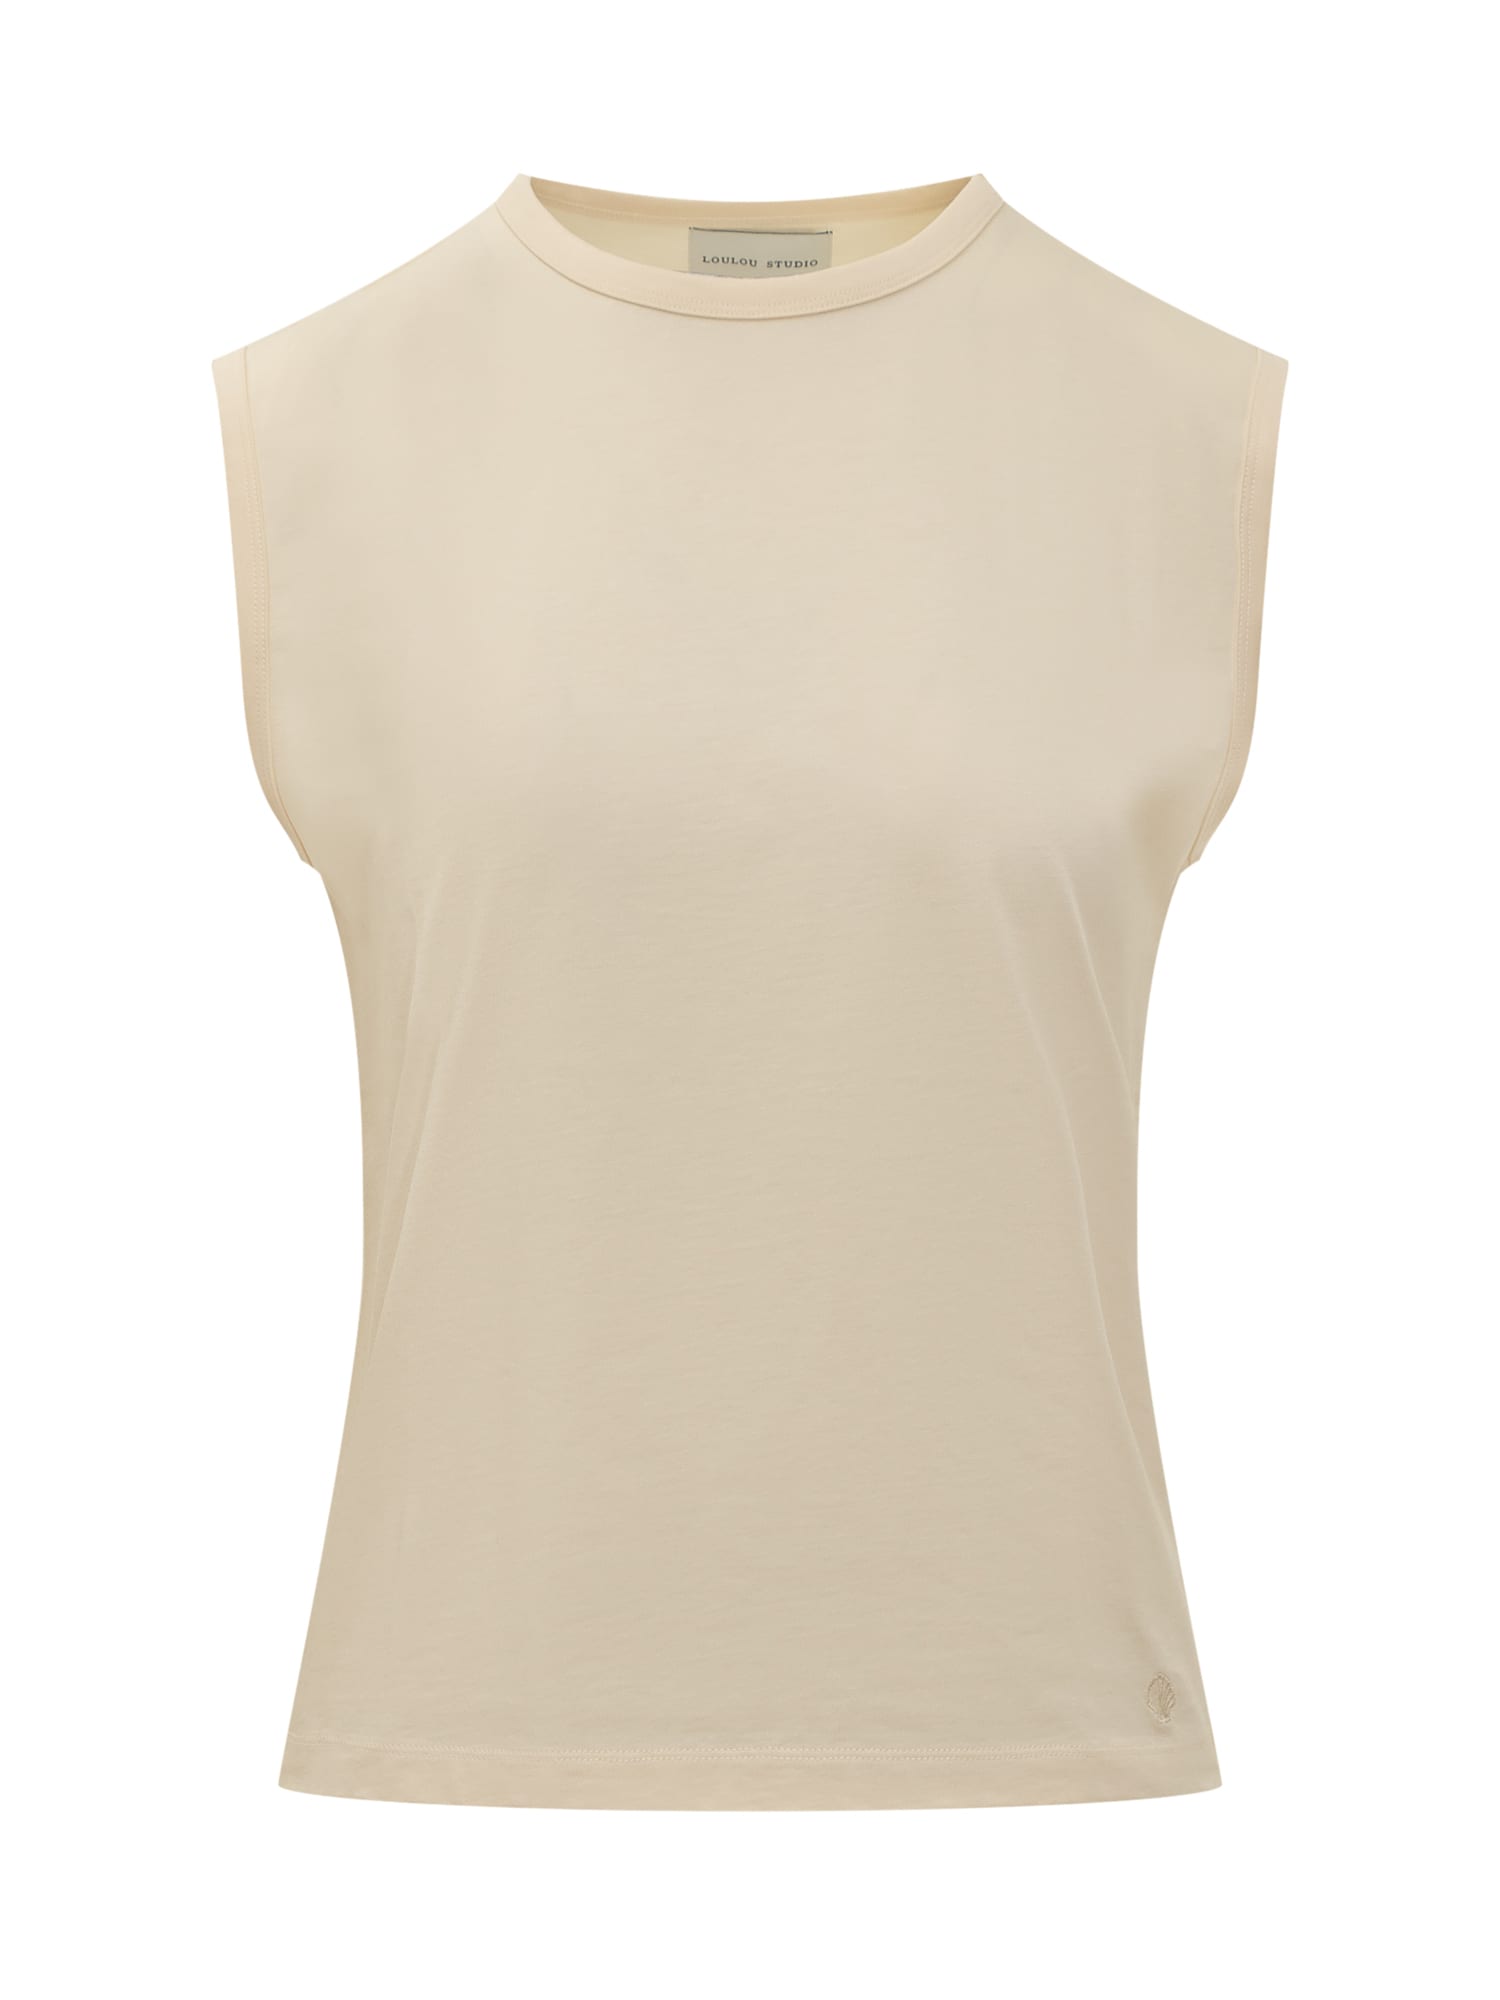 Loulou Studio Top In Rice Ivory